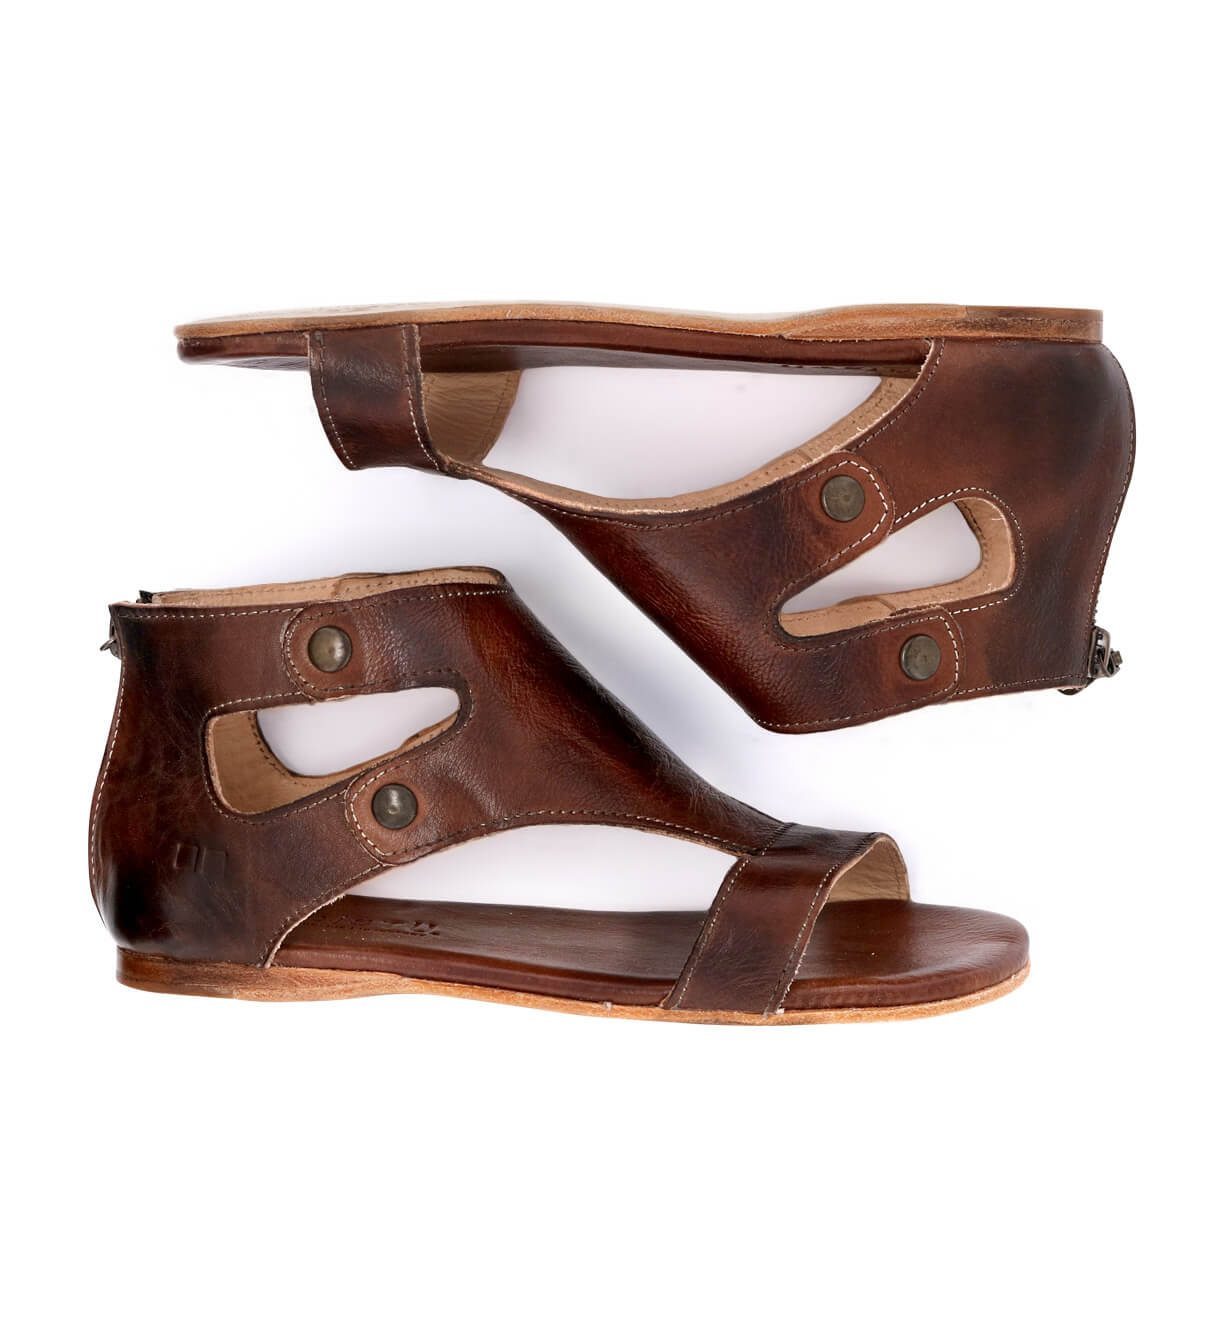 A pair of Bed Stu women's brown leather sandals.